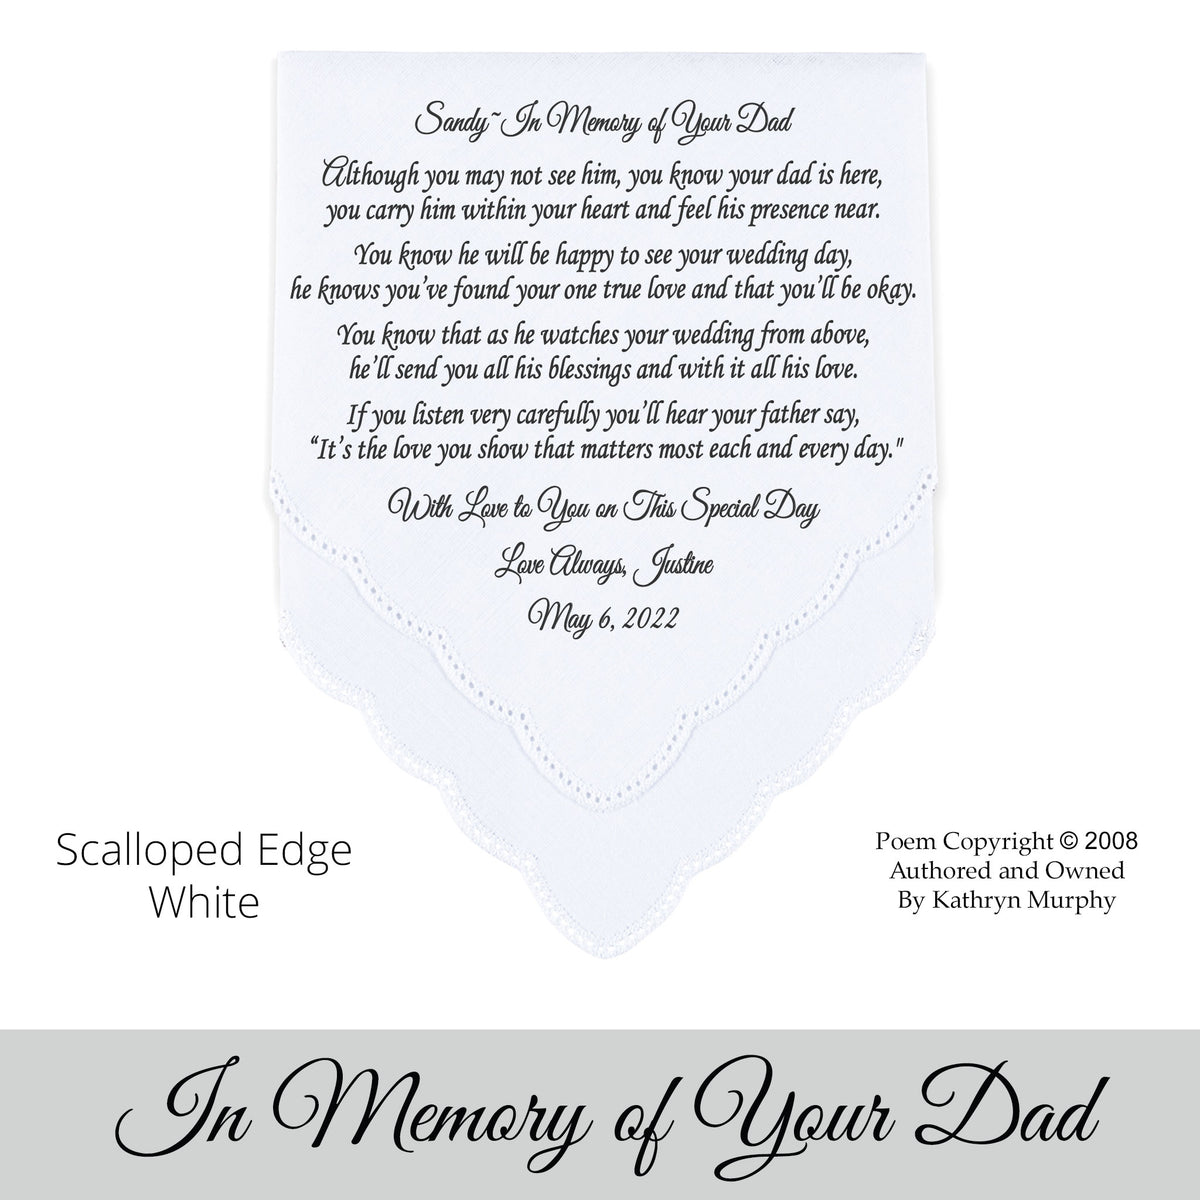 Gift for the Bride wedding hankie with the poem In Memory of your dad